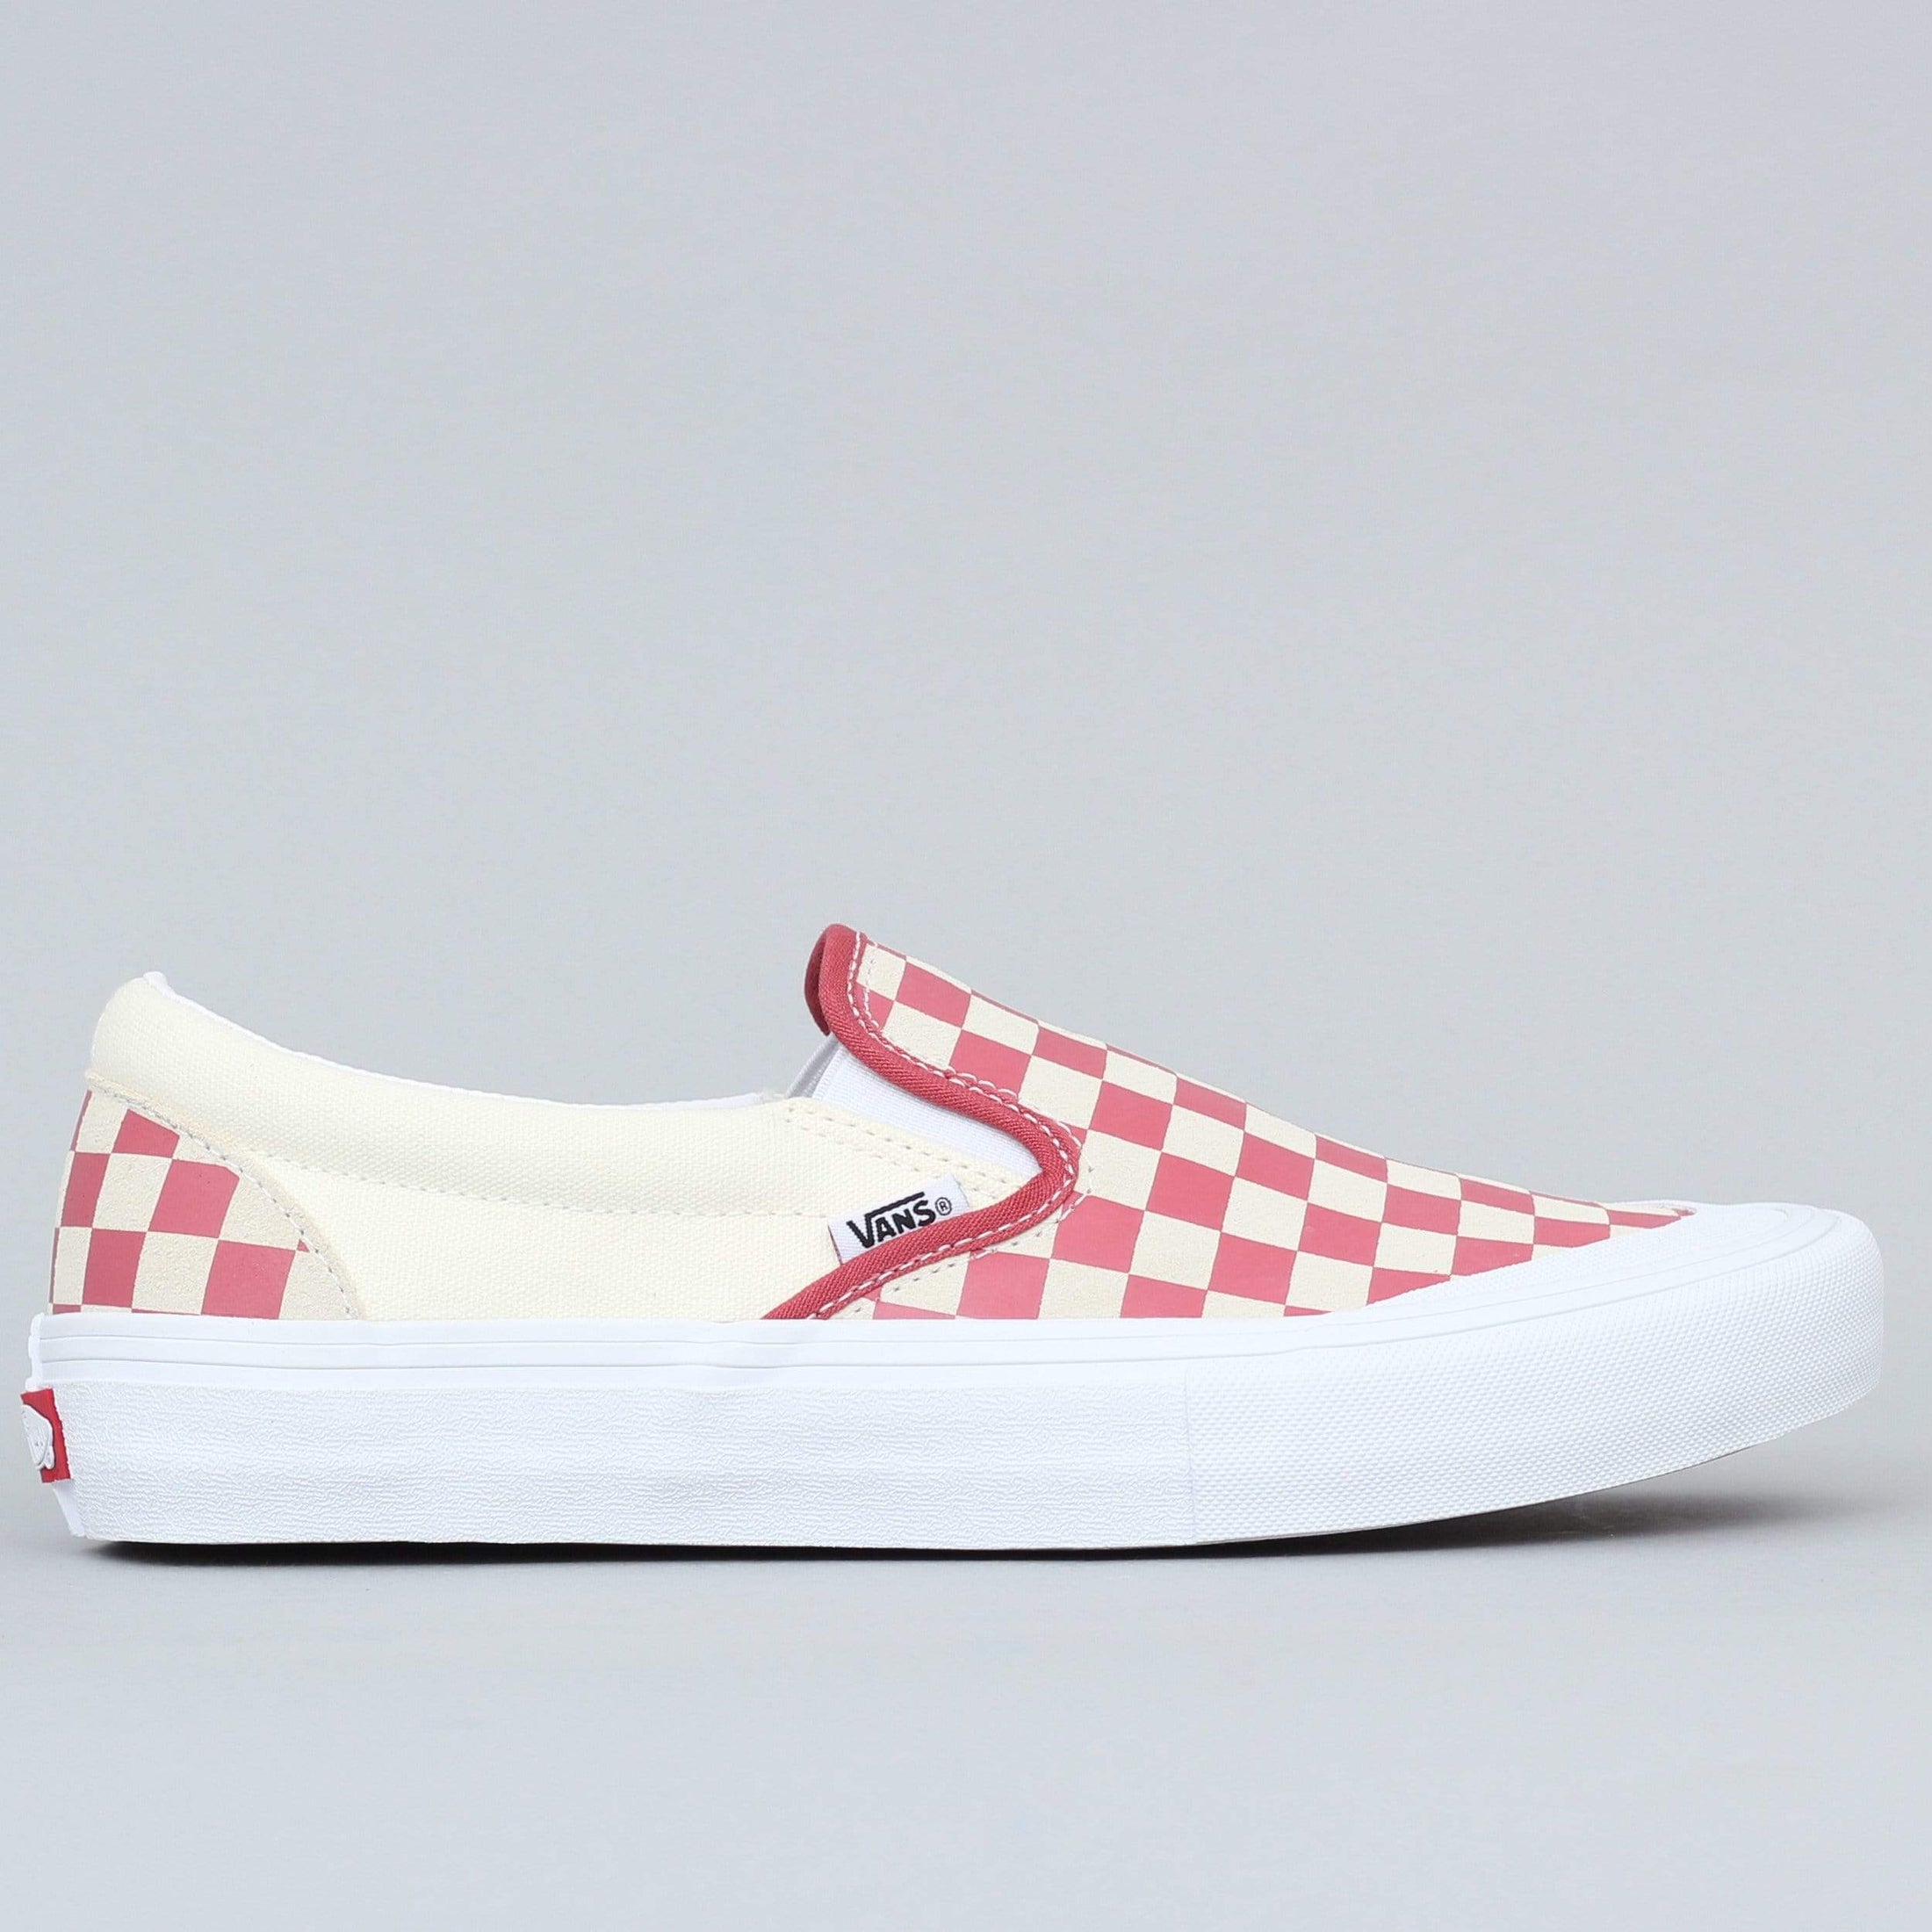 Vans Slip-On Pro Shoes (Checkerboard) Mineral Red